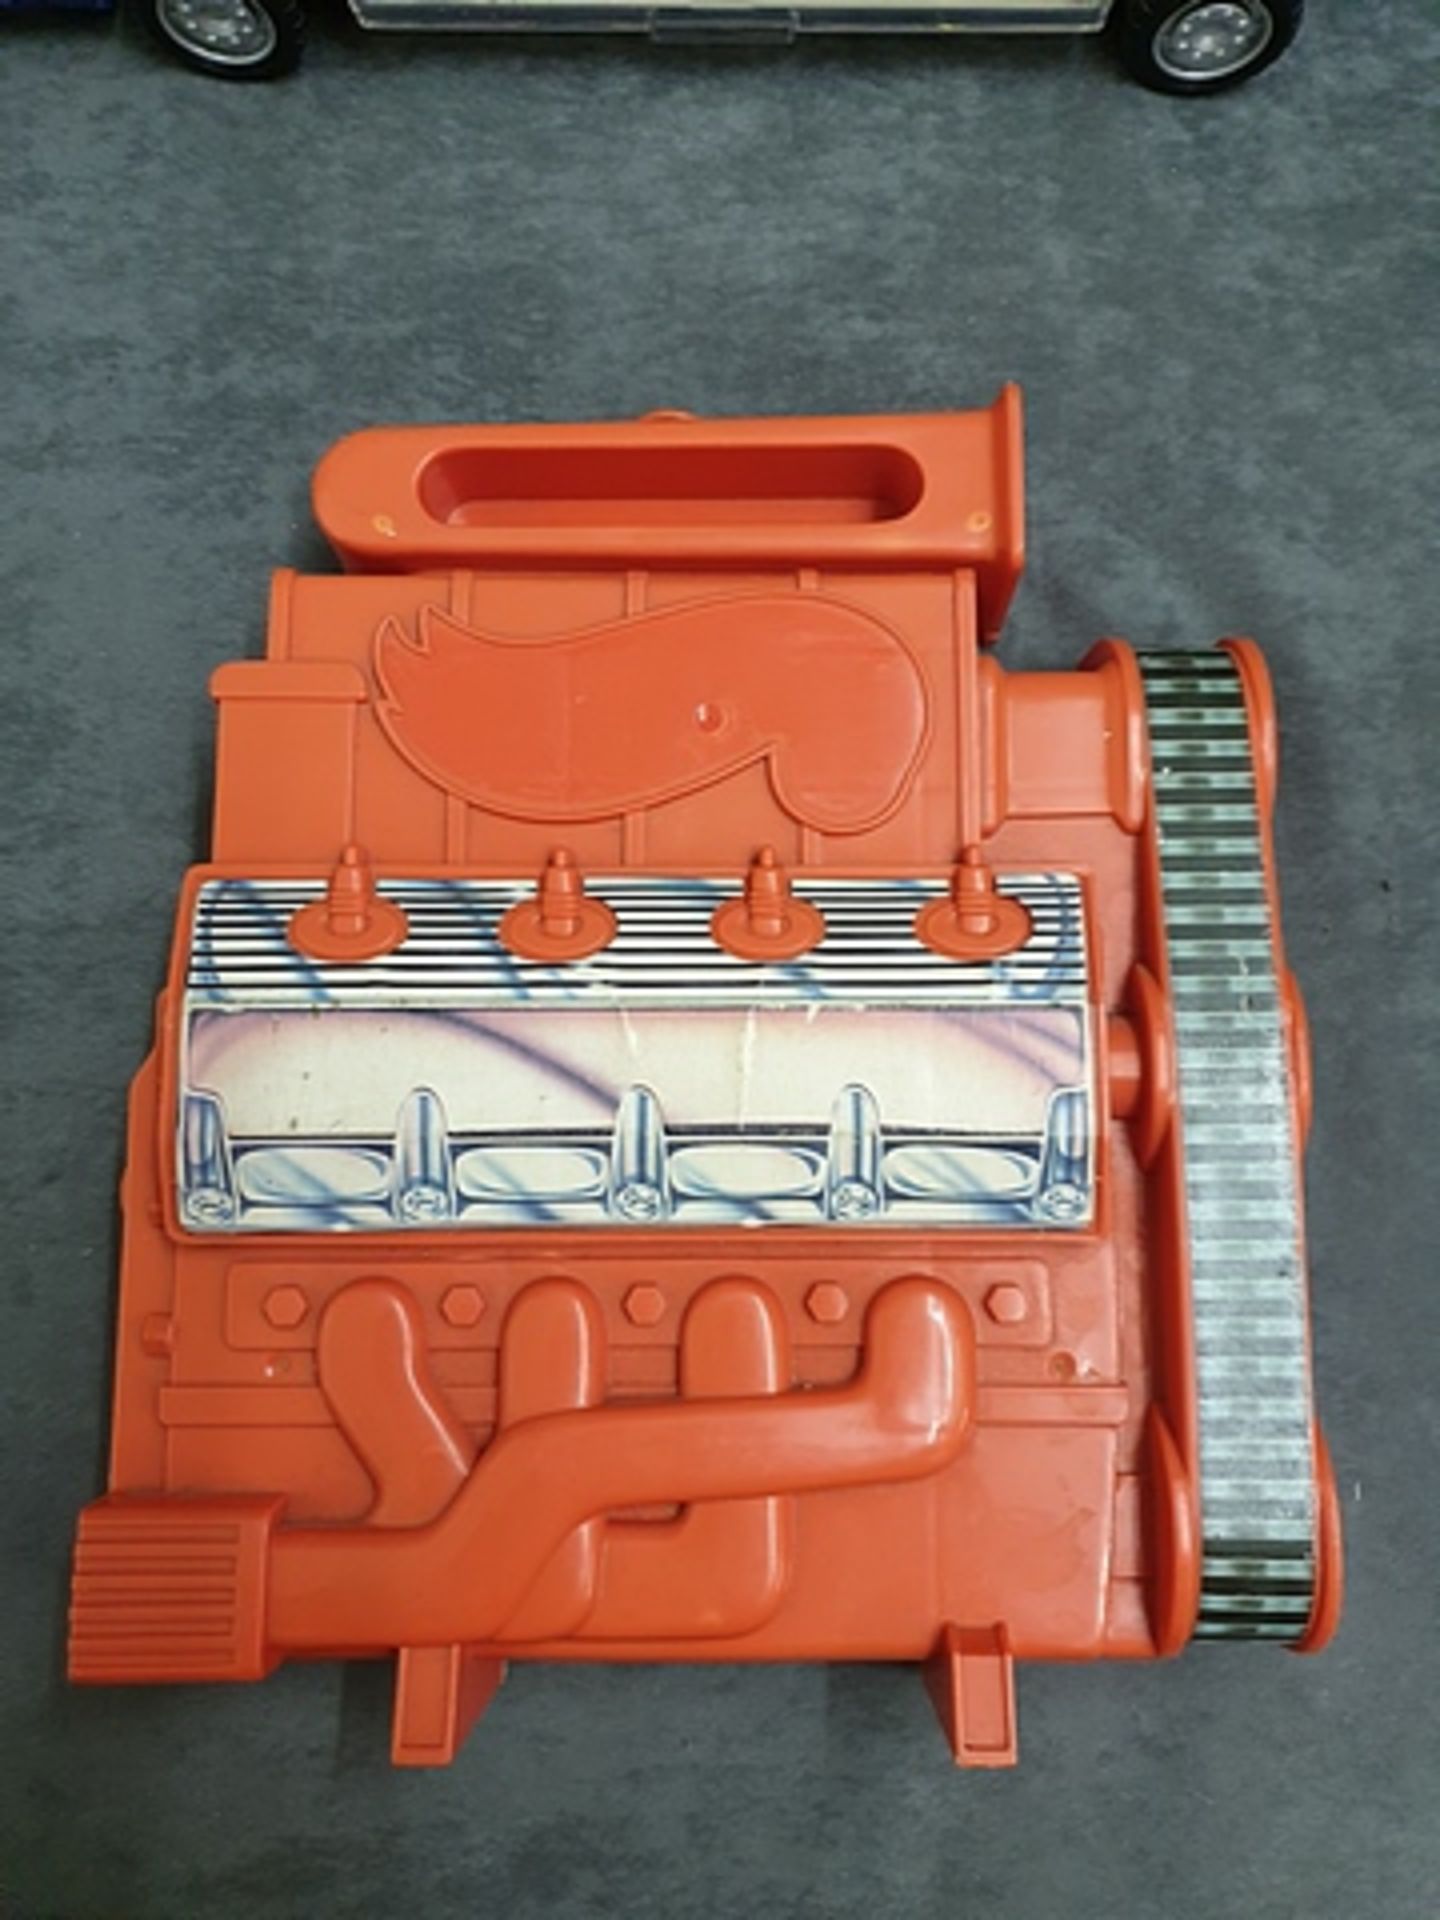 Vintage Hot Wheels Red Racers Engine Carrying Storage Case Car Holder 1983Complete With 18 Cars